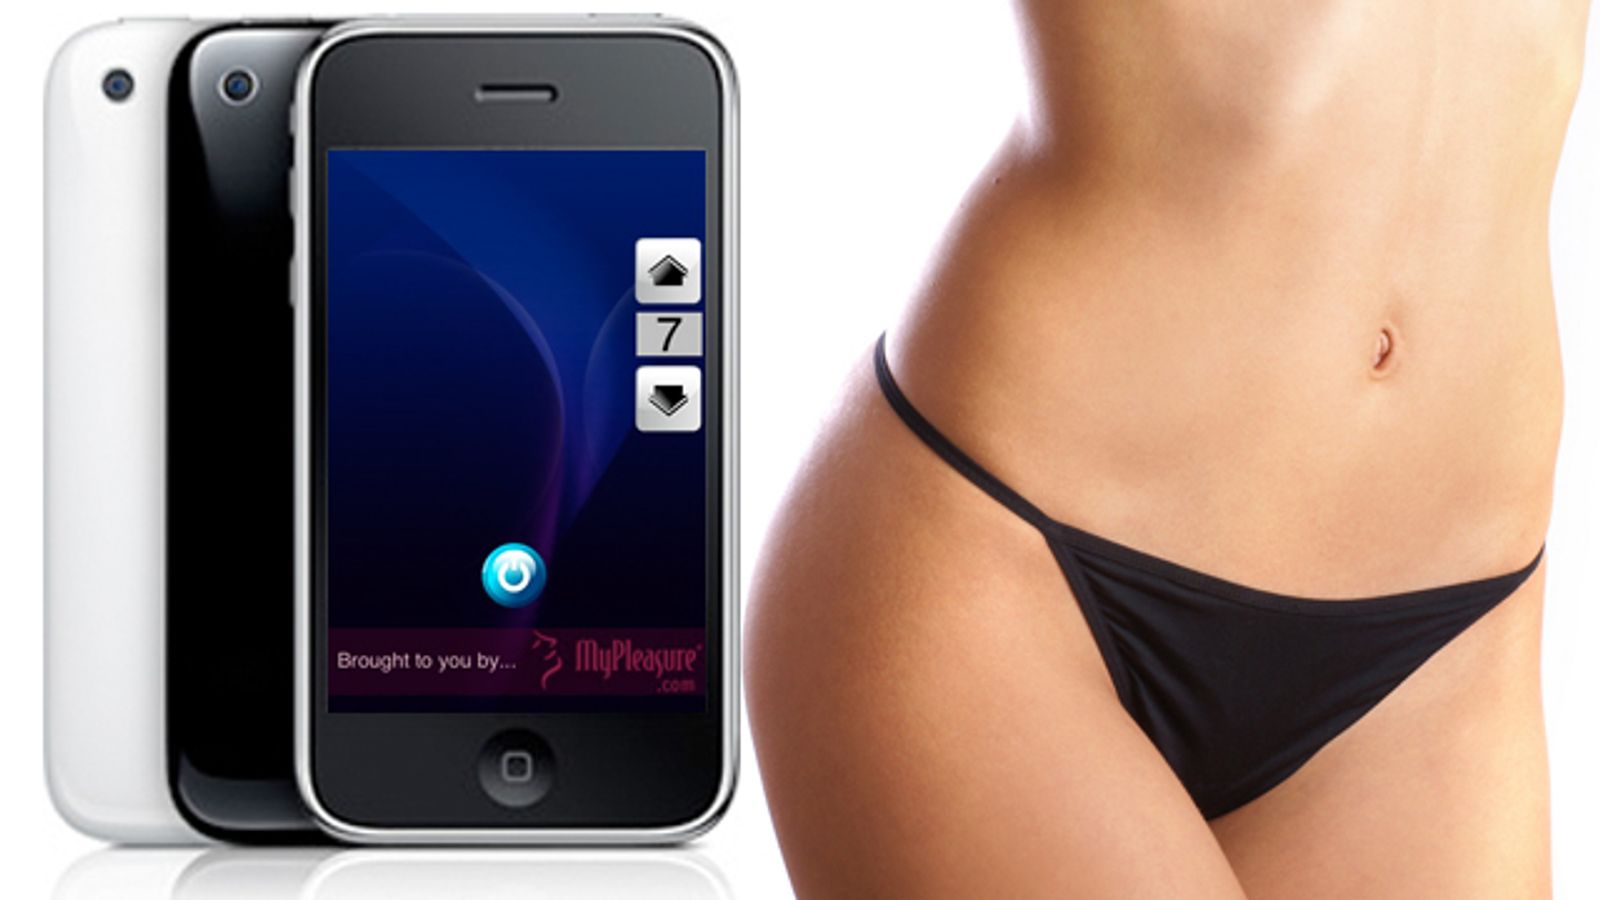 Apple Approves Vibrator App for iPhone